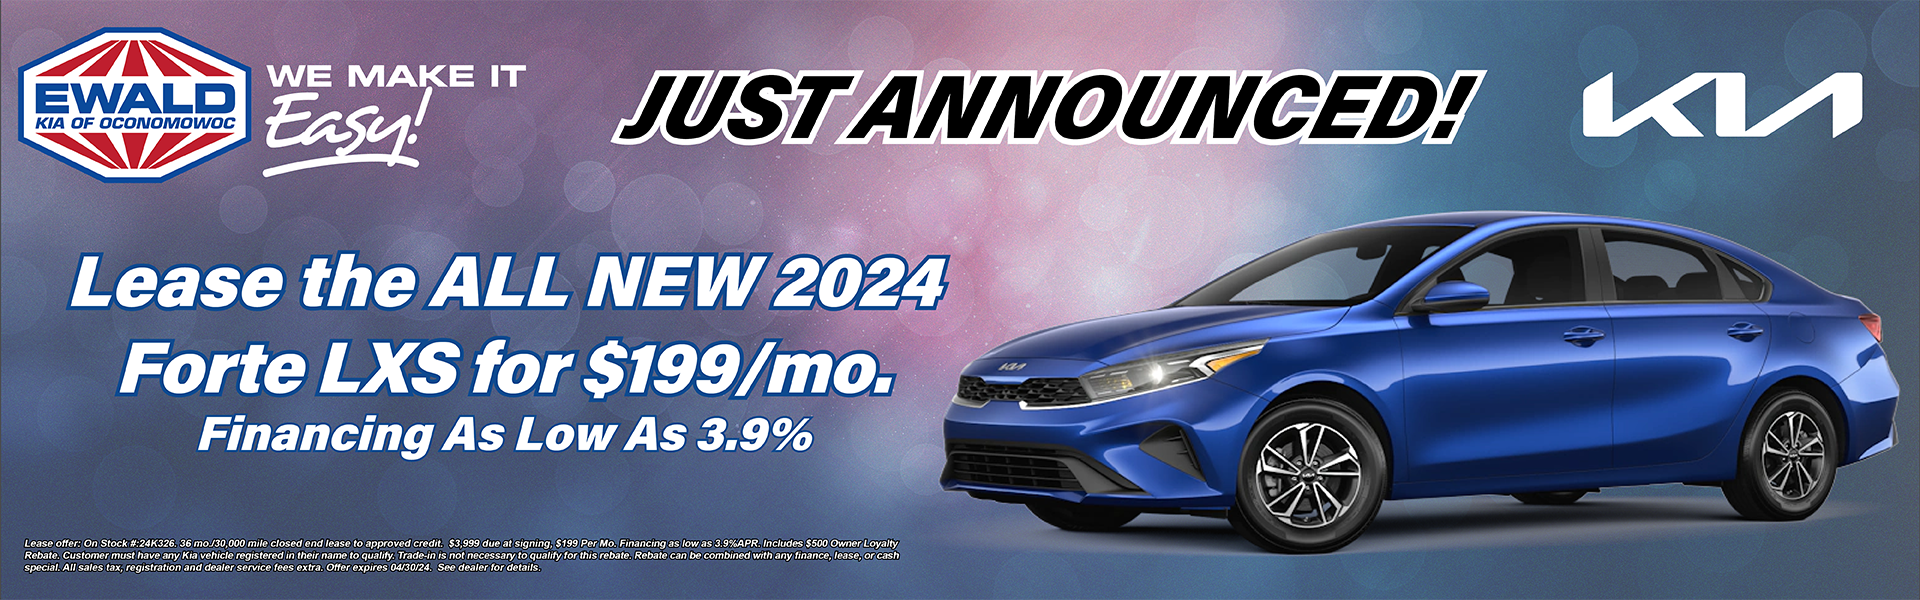 Save on the 2024 Forte LXS